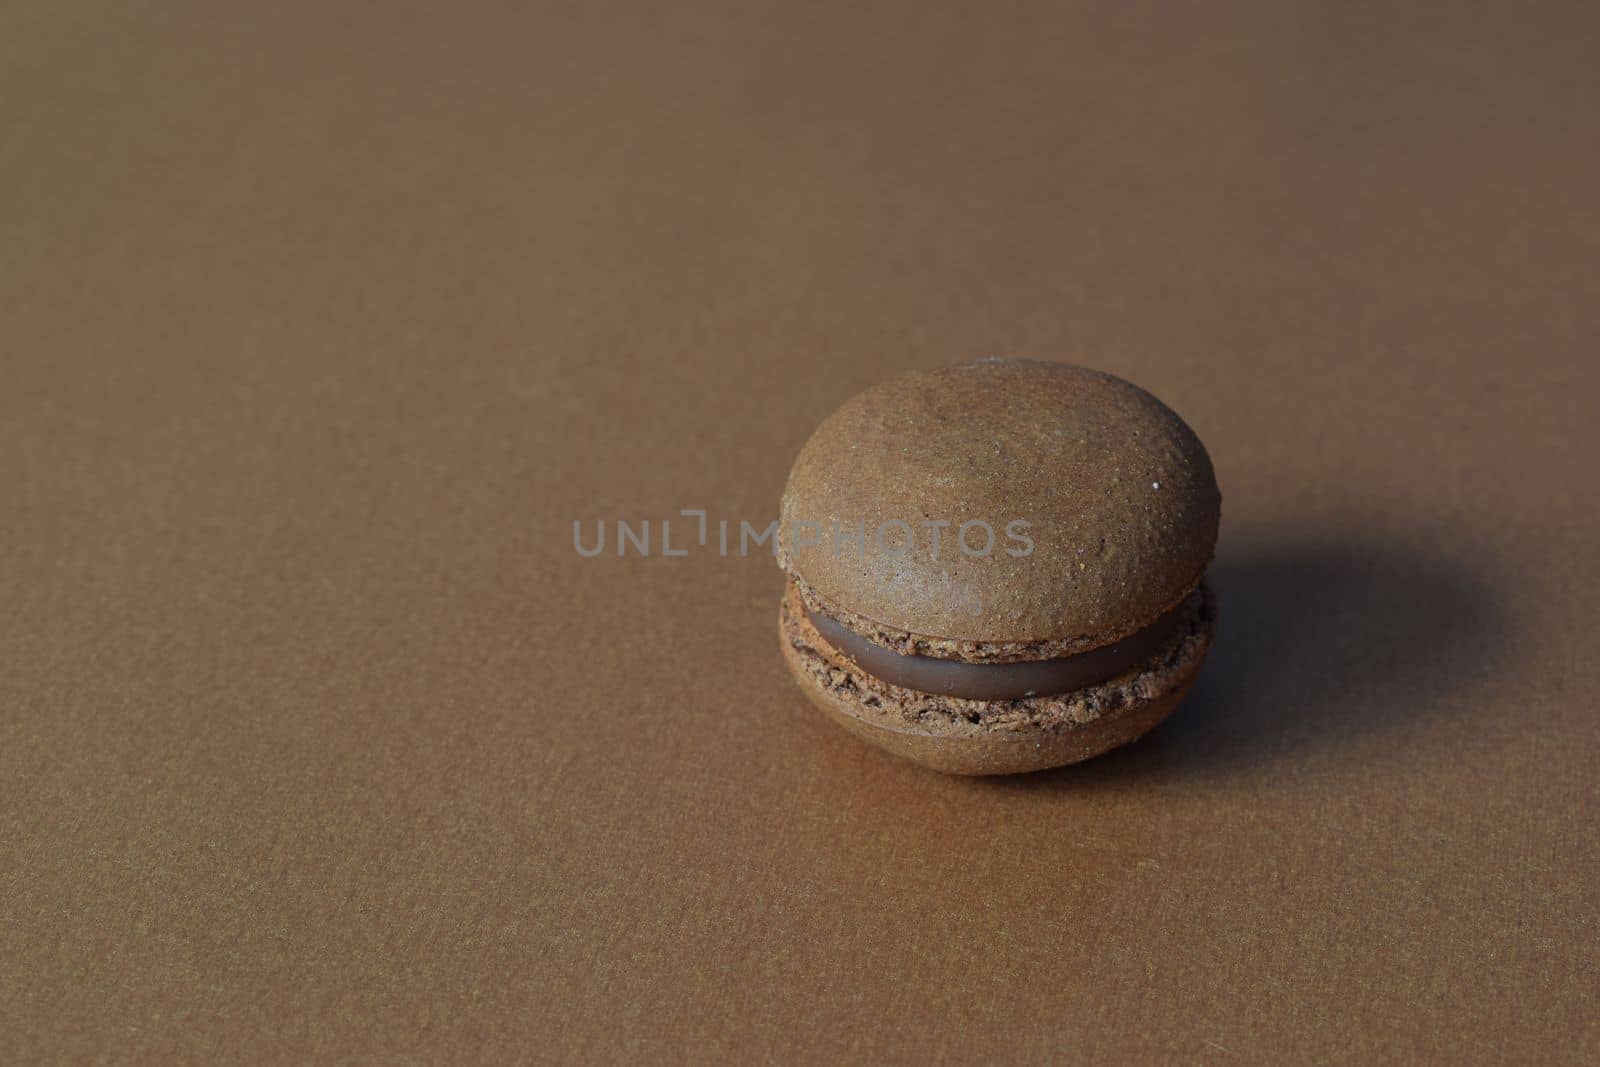 A brown macaron on a minimalistic brown background.